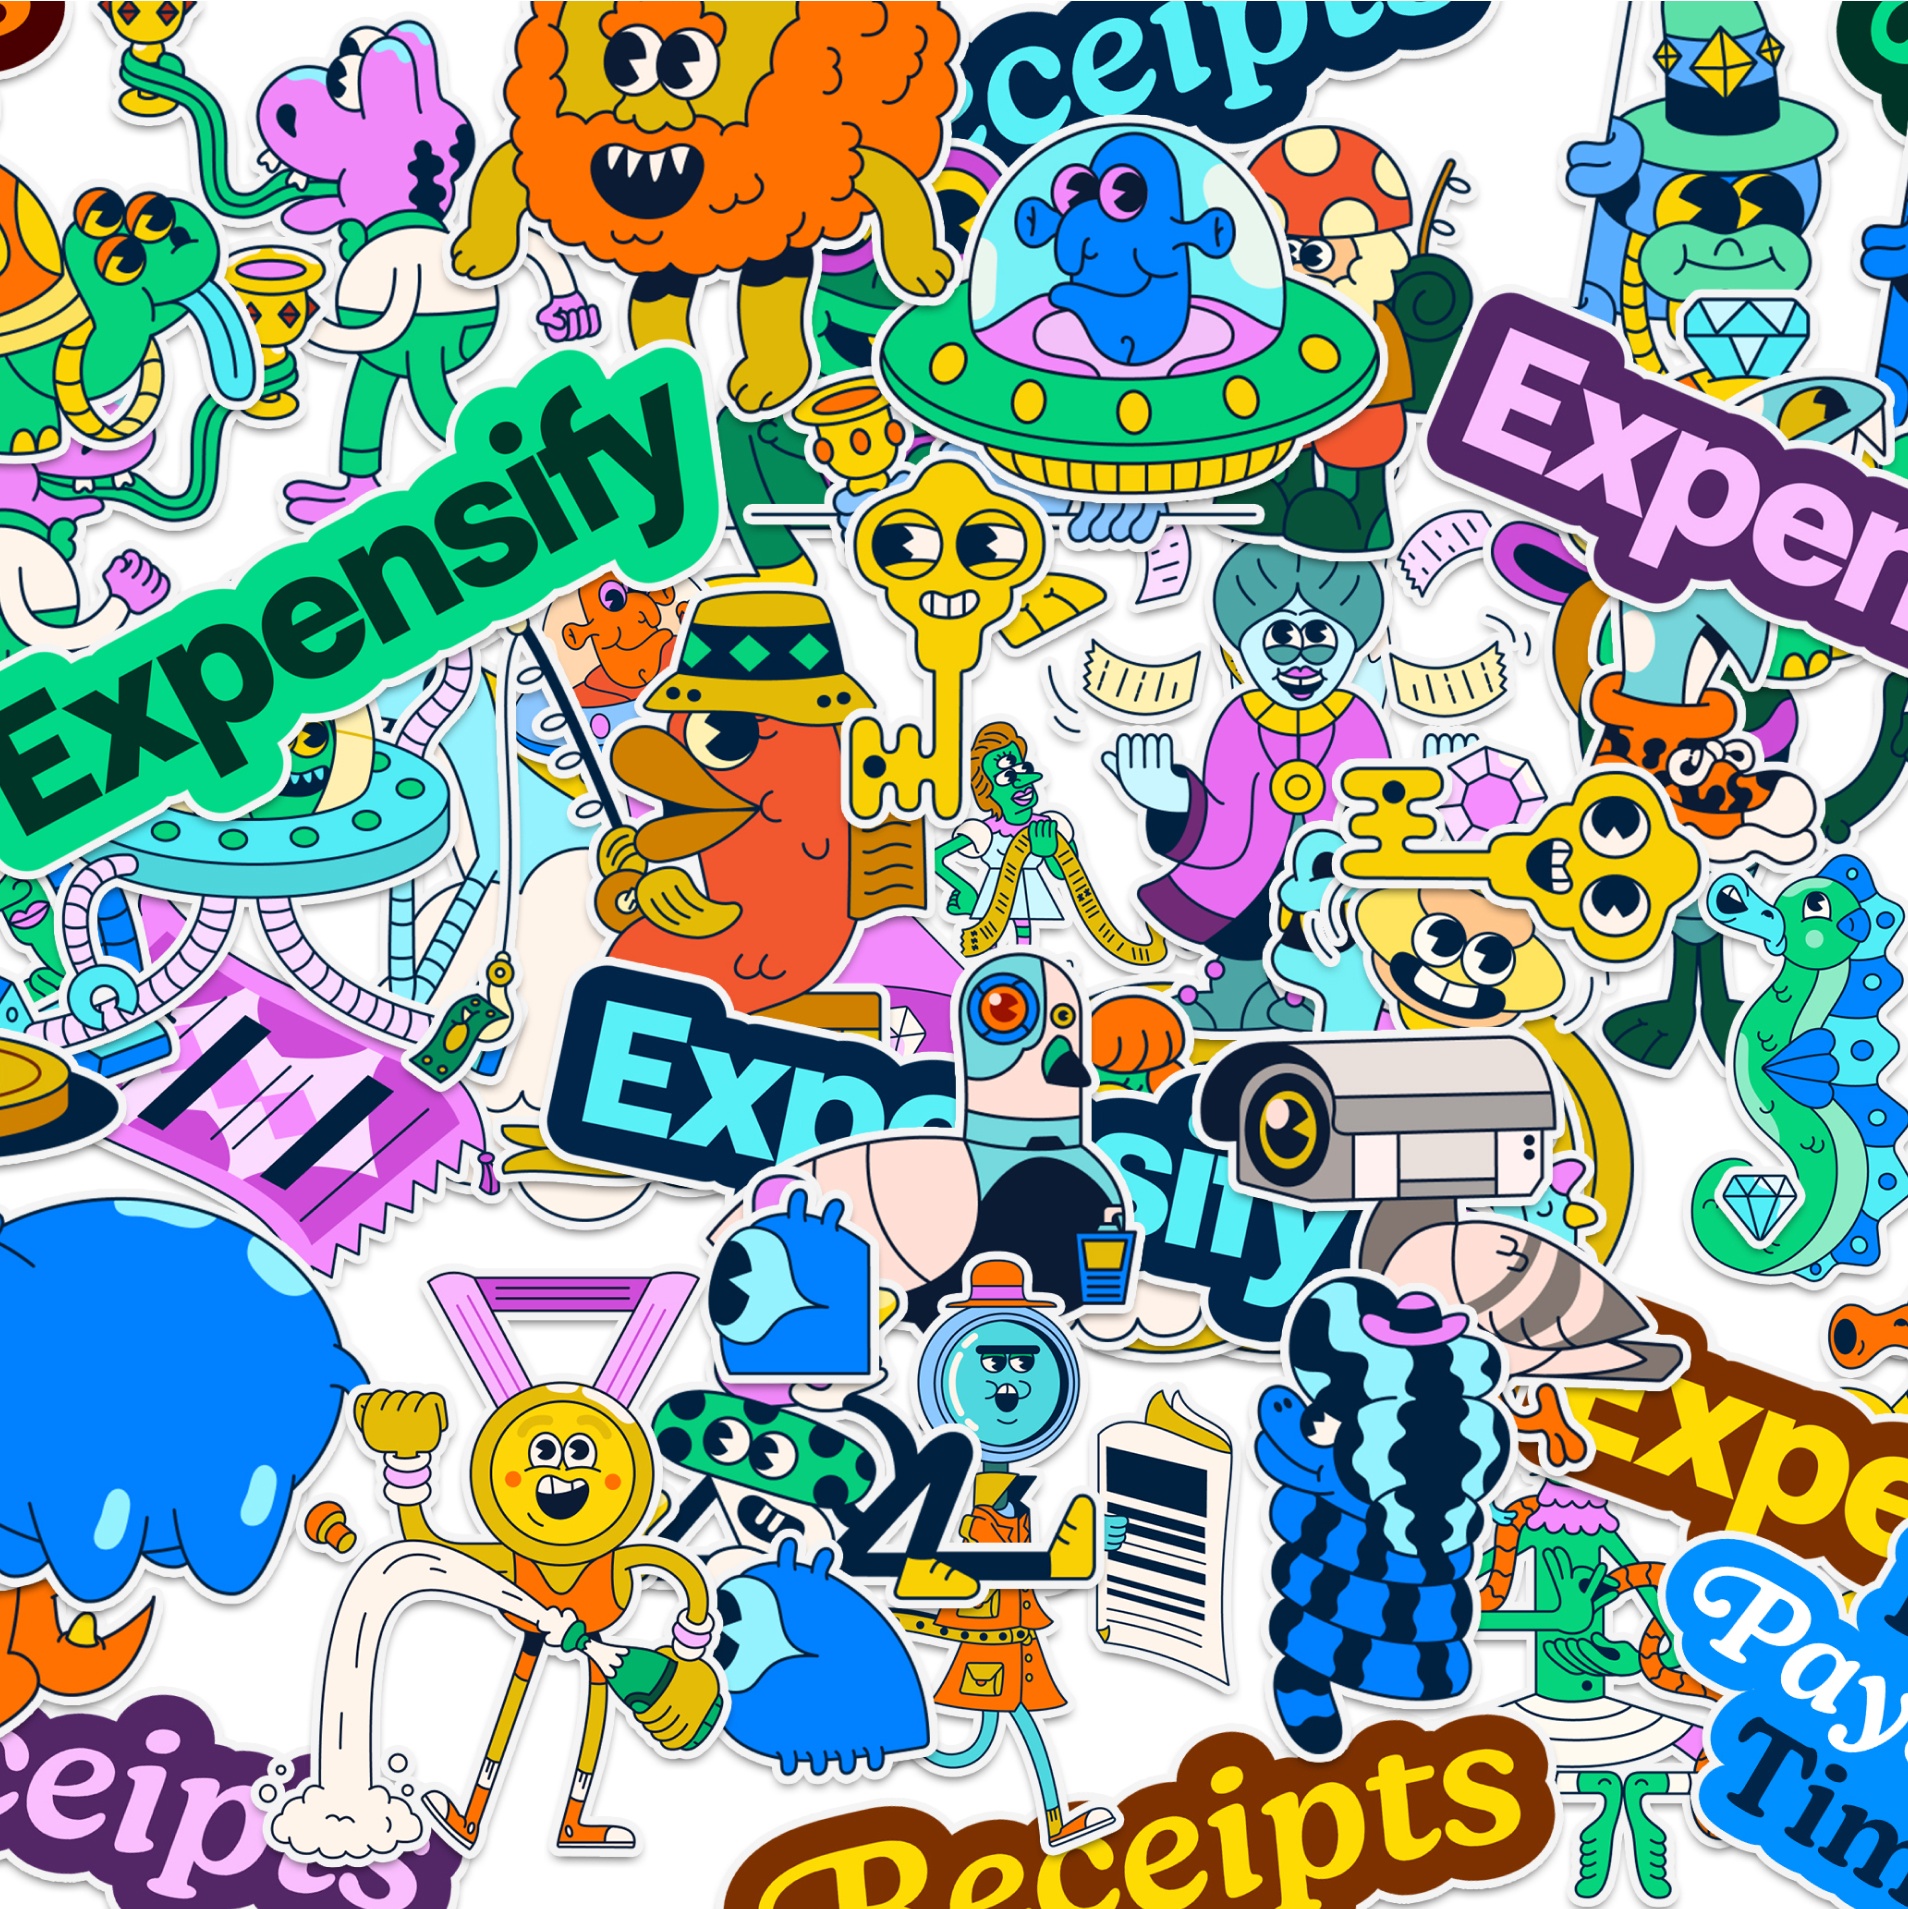 A collage of various Expensify characters and brand assets as stickers.